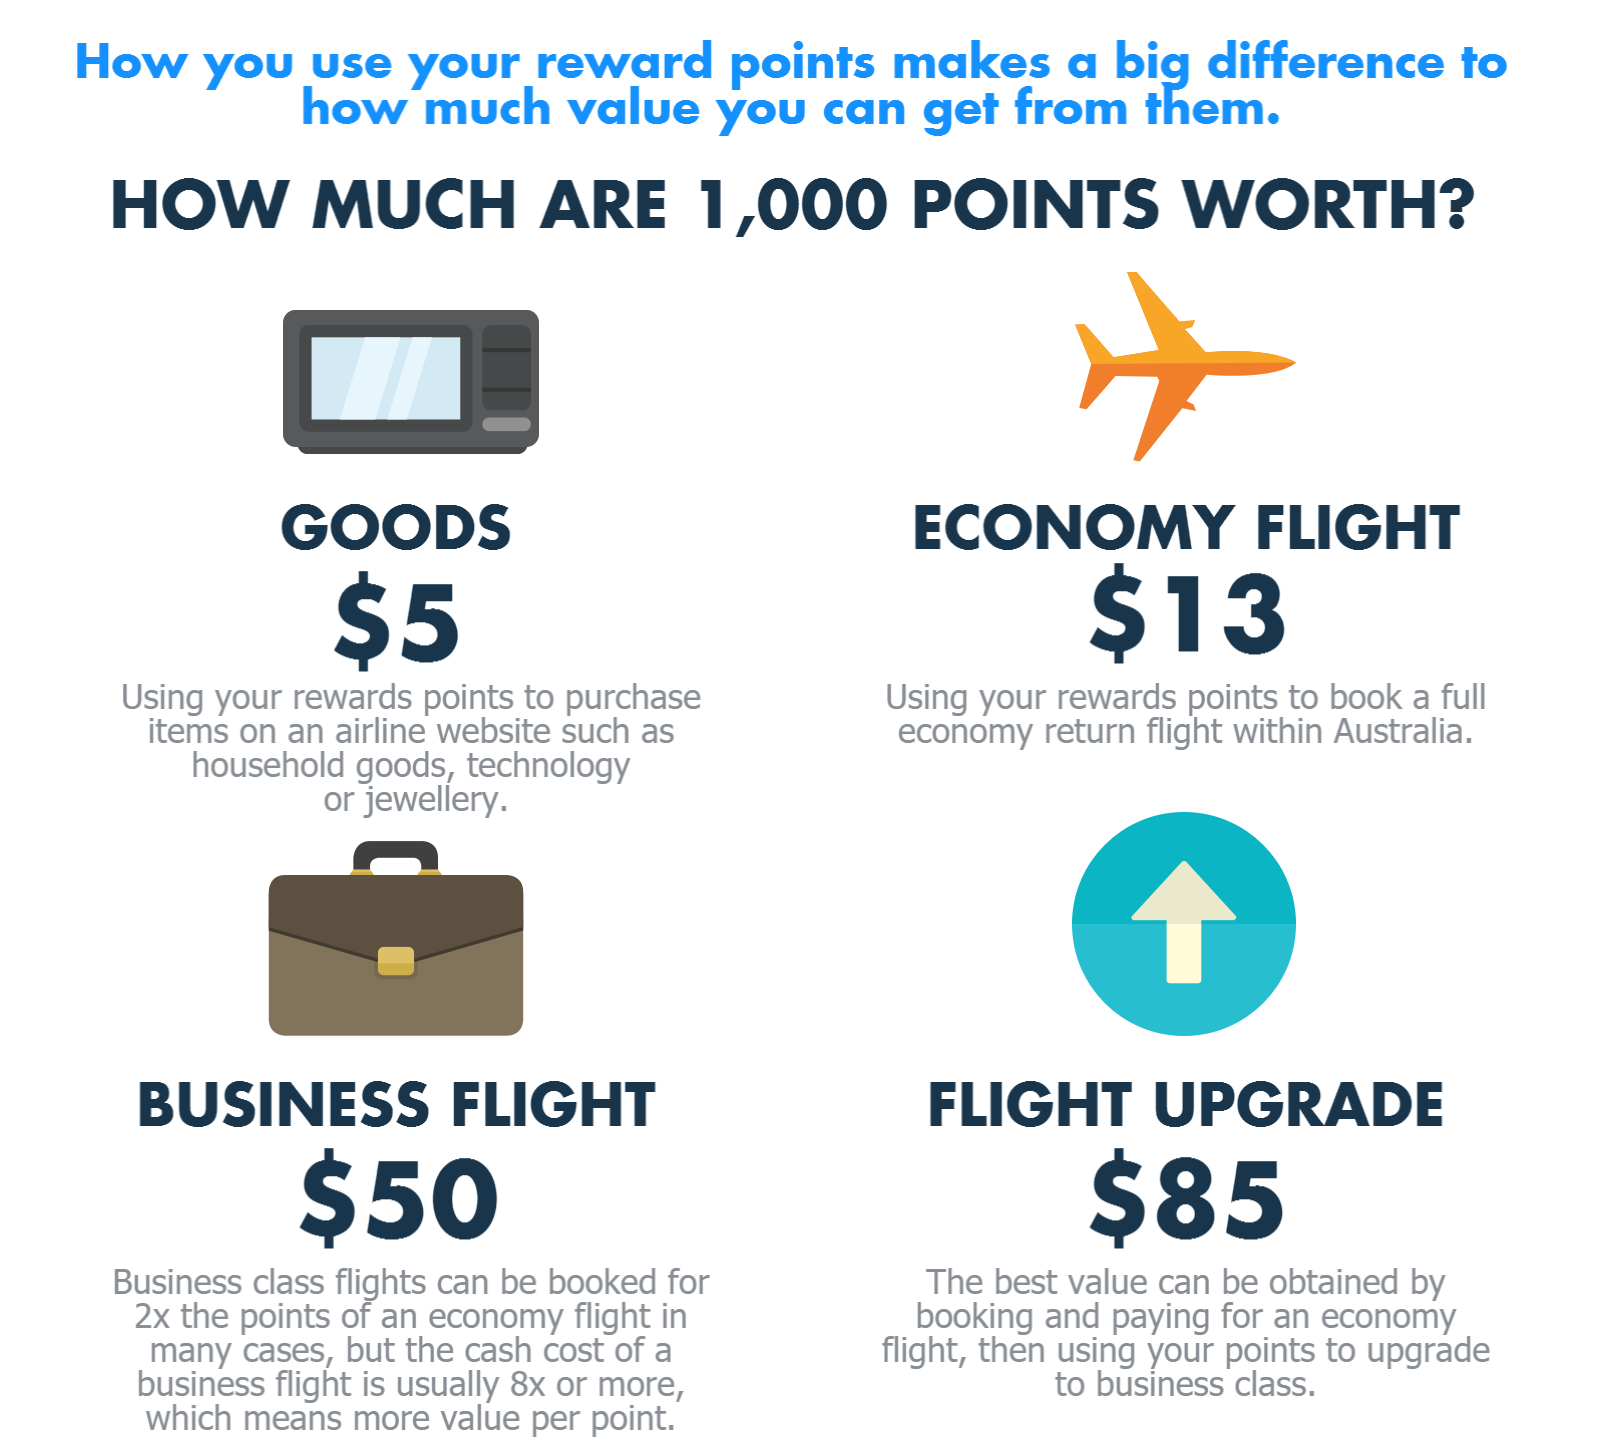 how to upgrade to business class?